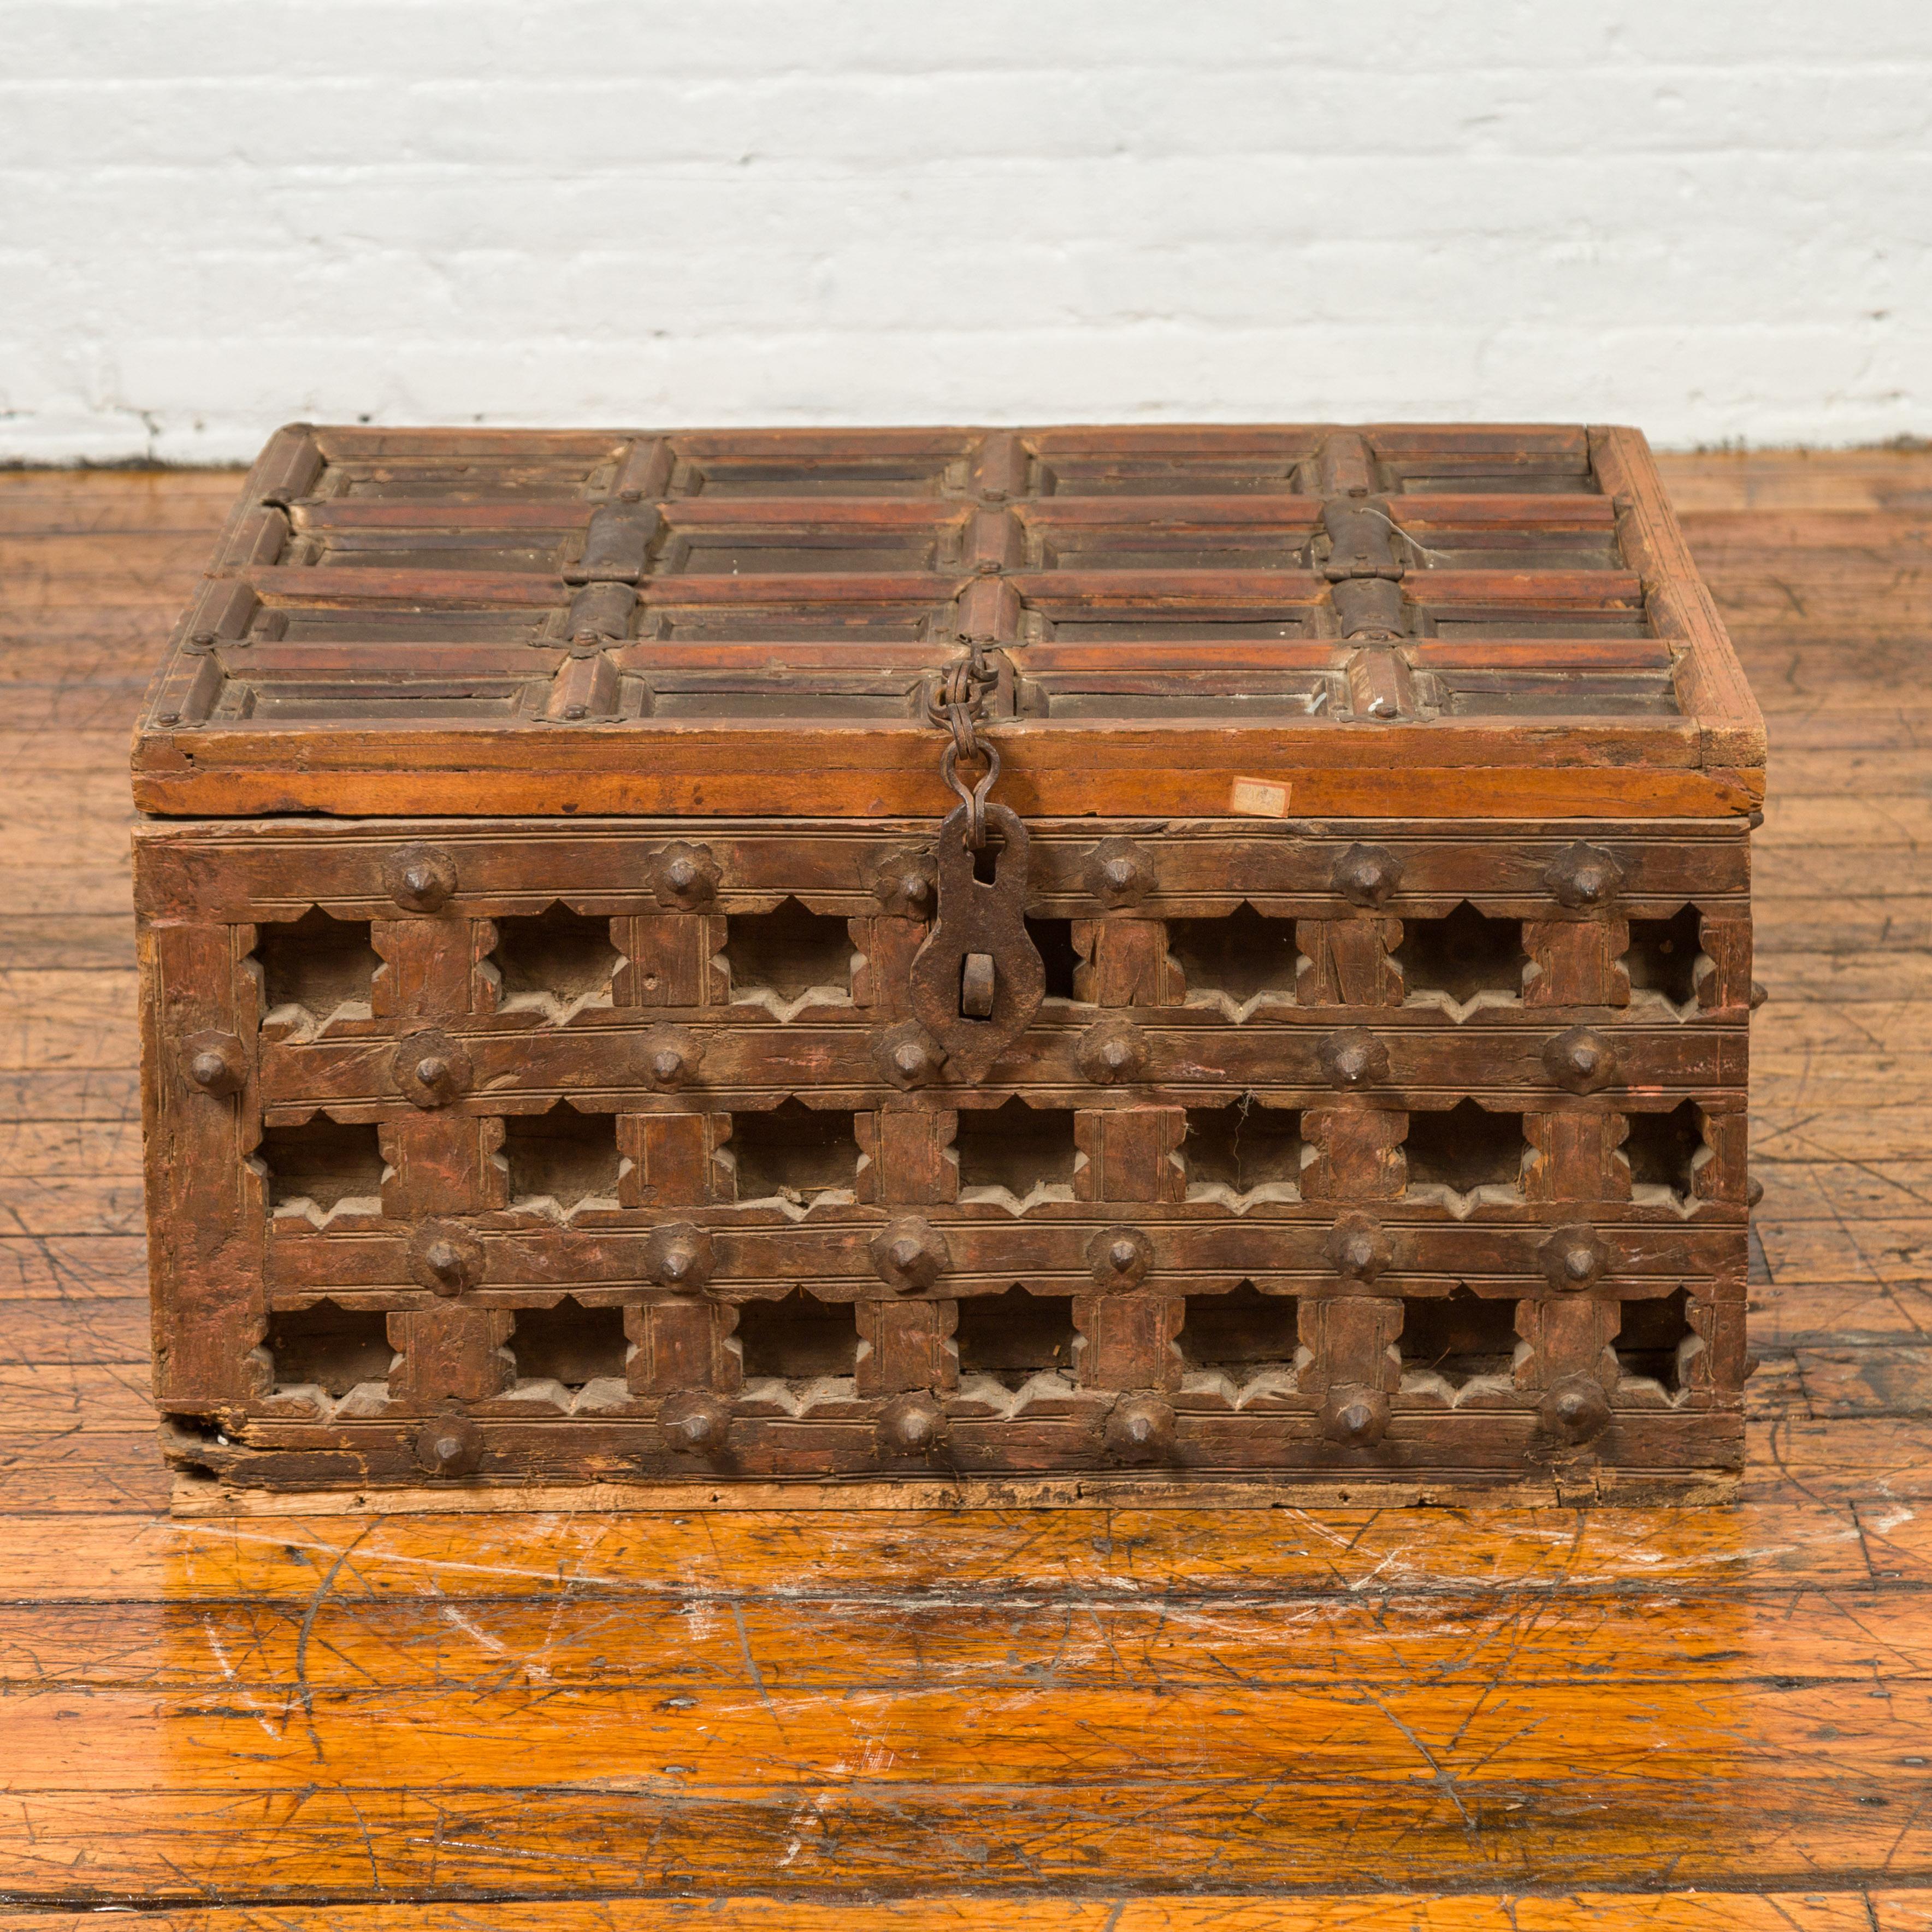 An antique Indian wooden treasure chest from the 19th century, with paneled top, pierced stars and iron hardware. Found in a courtyard, this wooden treasure chest charms us with its weathered appearance and pierced motifs. The rectangular paneled